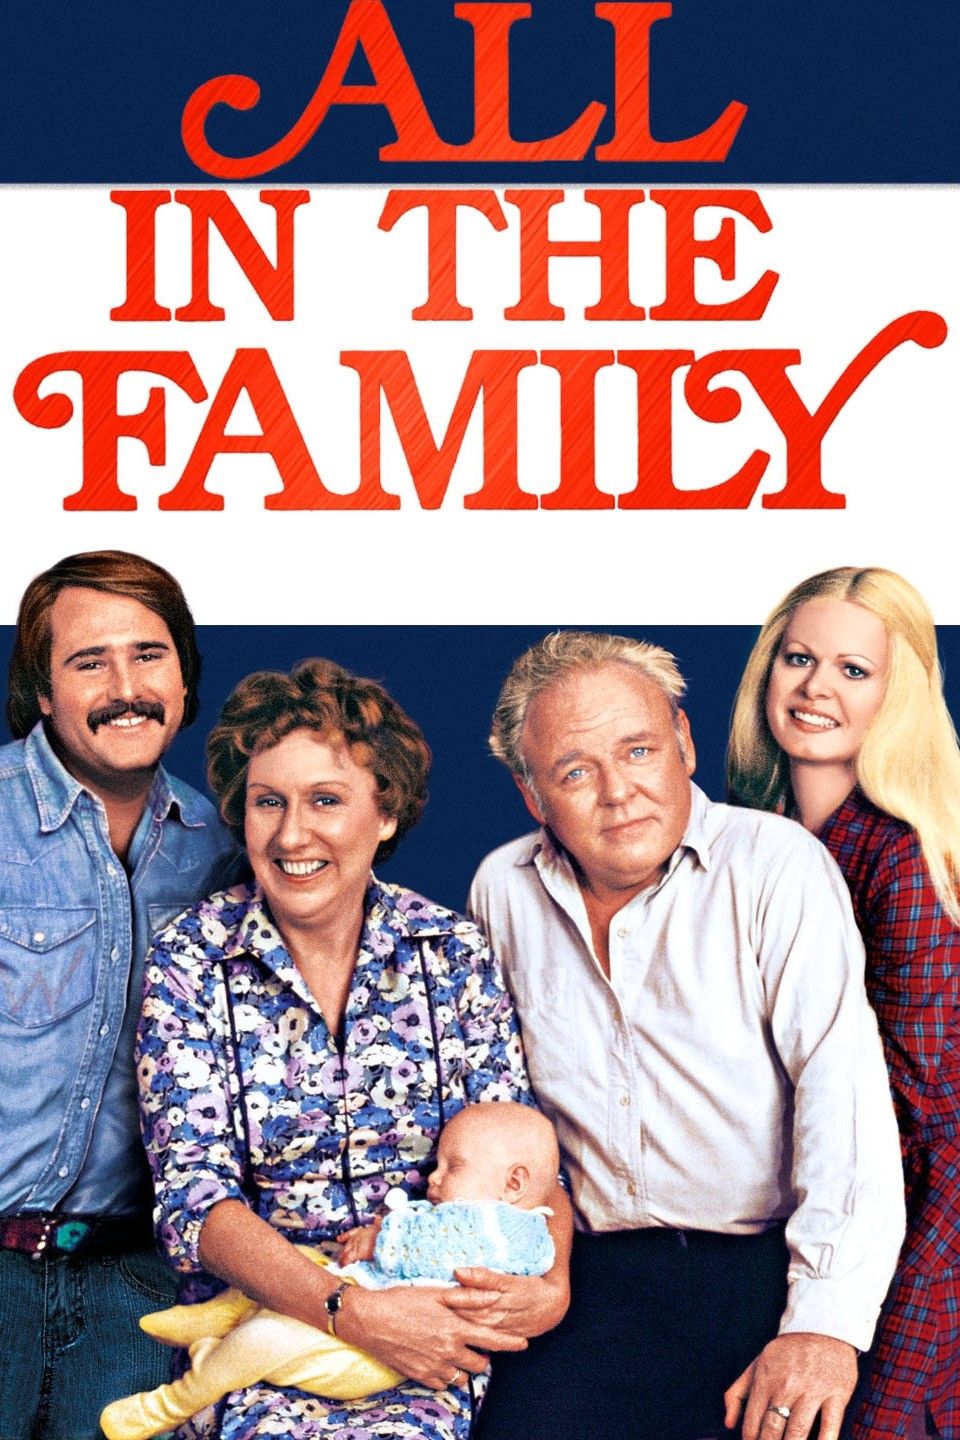 All in the Family Seizoen 06 Episode 01 NL-Subs - Enhanced Topaz Dione 4xUpscale